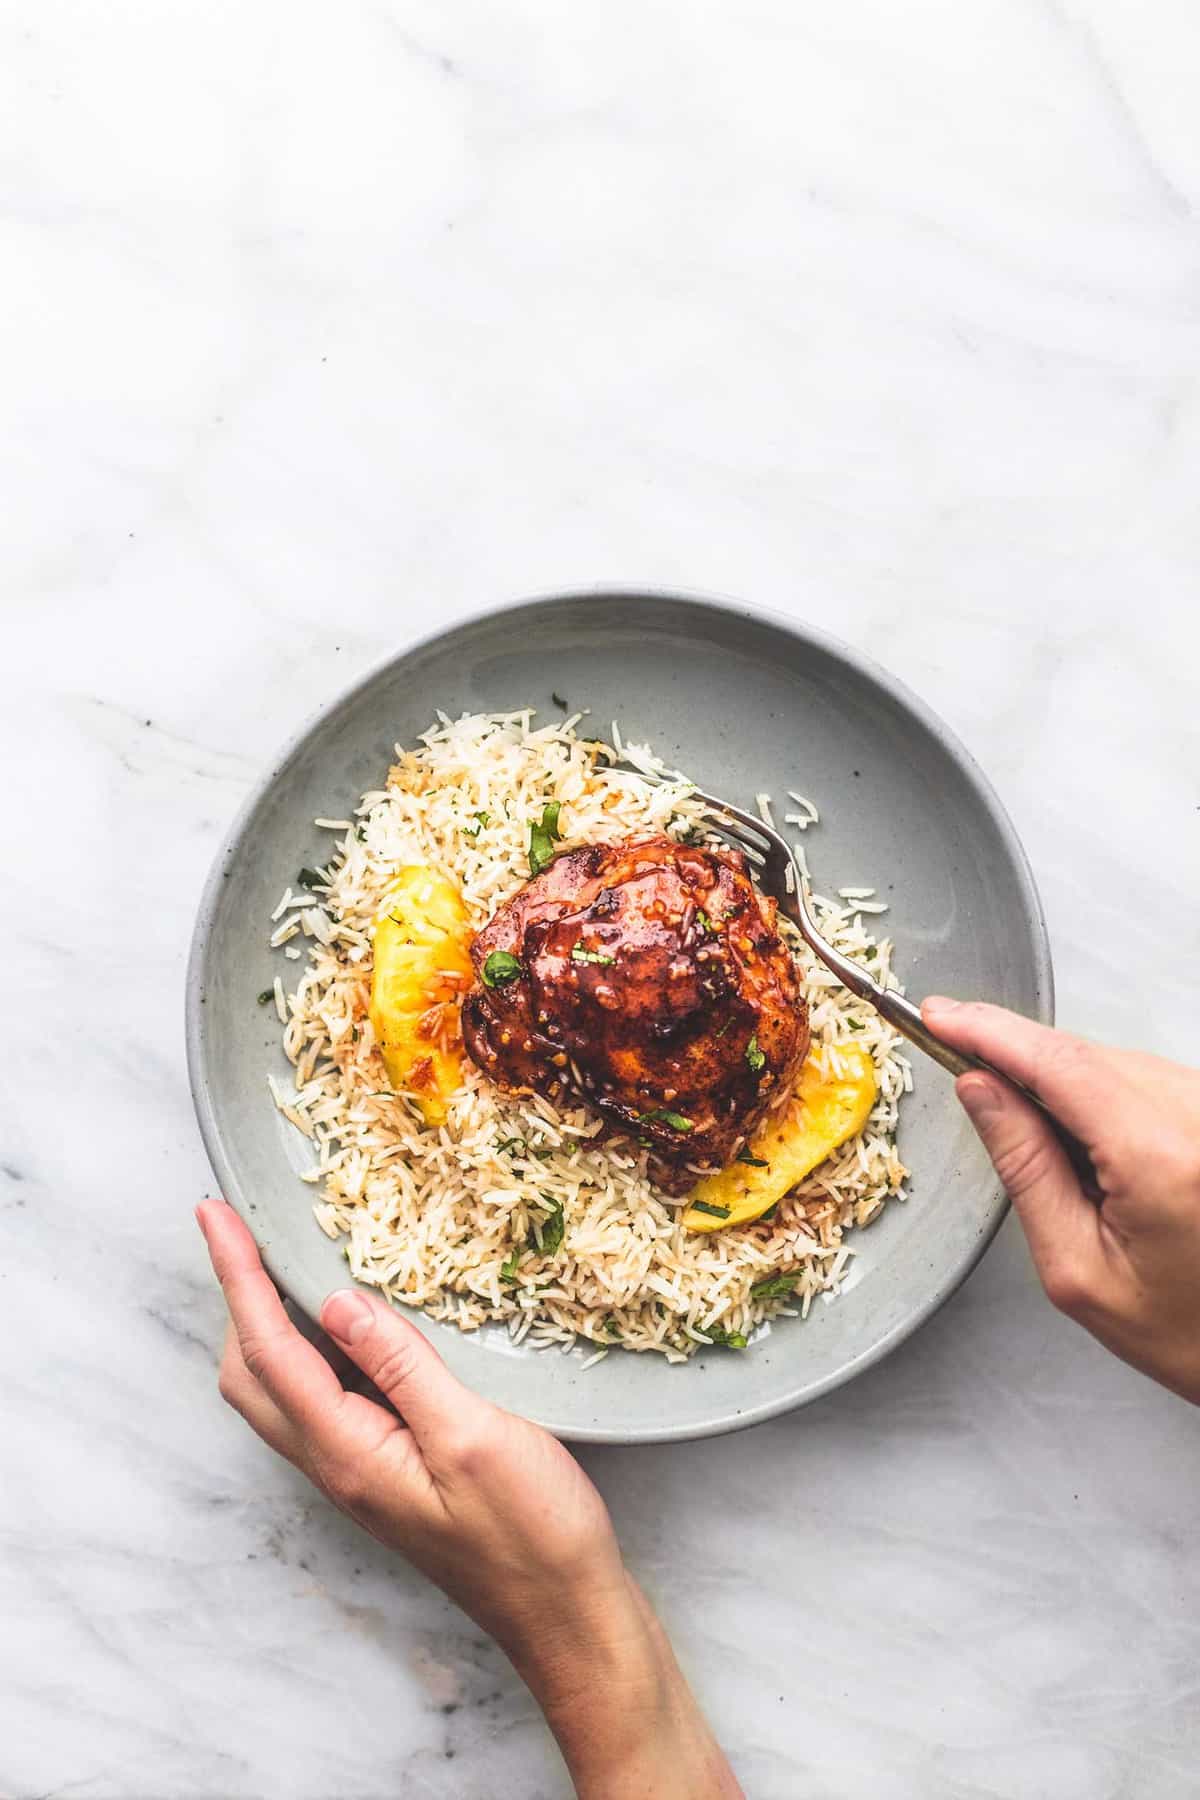 top view of Island glazed chicken and coconut rice on a plate with a hand holding one side of the plate and another grabbing a bite with a fork.